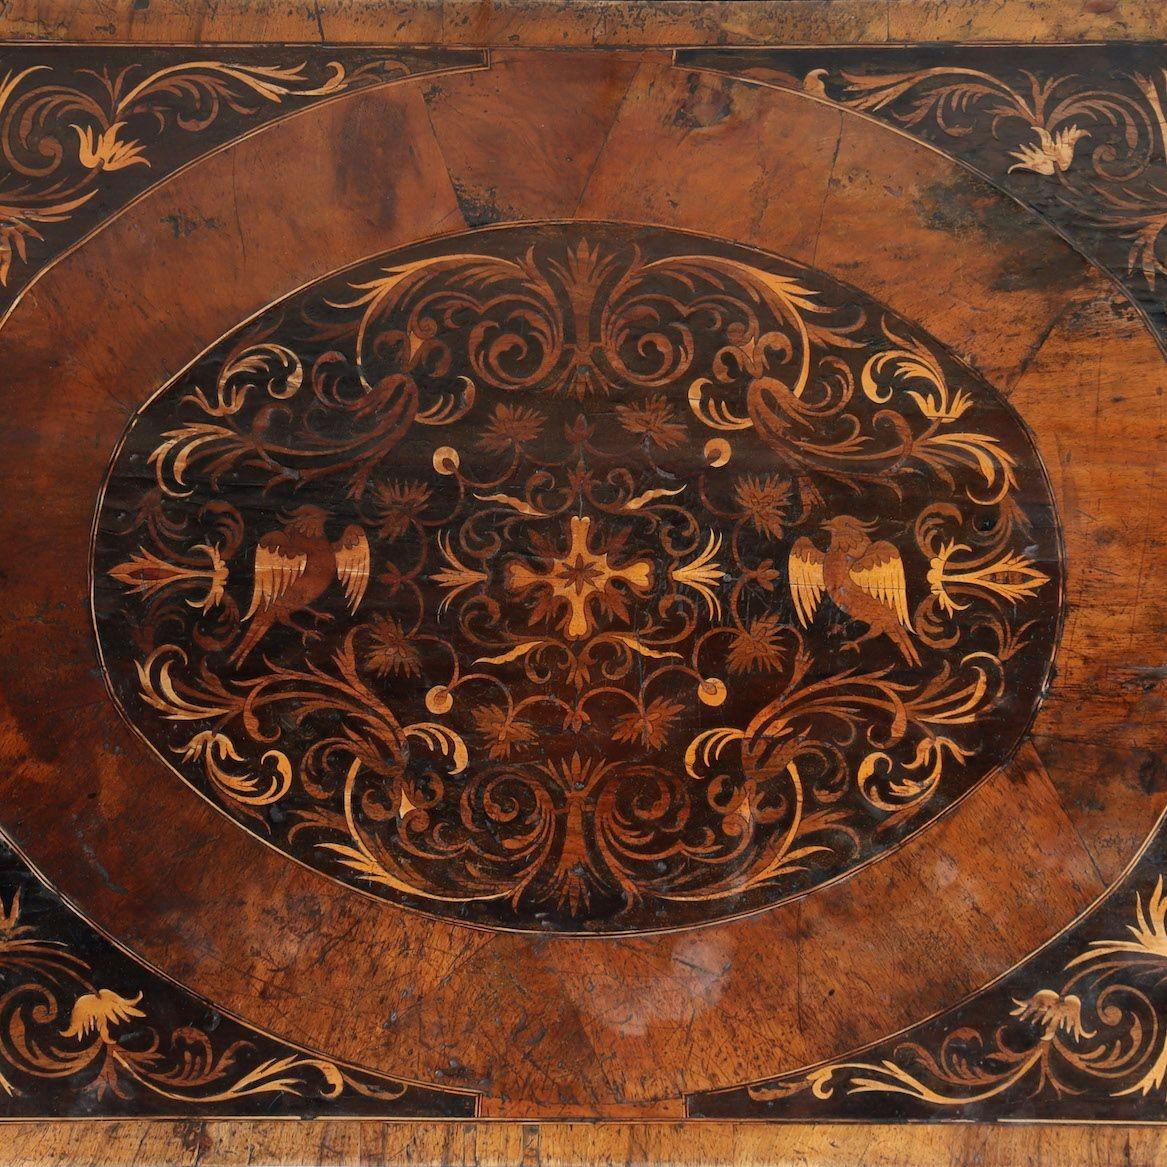 17th c. English William & Mary Walnut and Ebony Seaweed Marquetry Commode For Sale 6